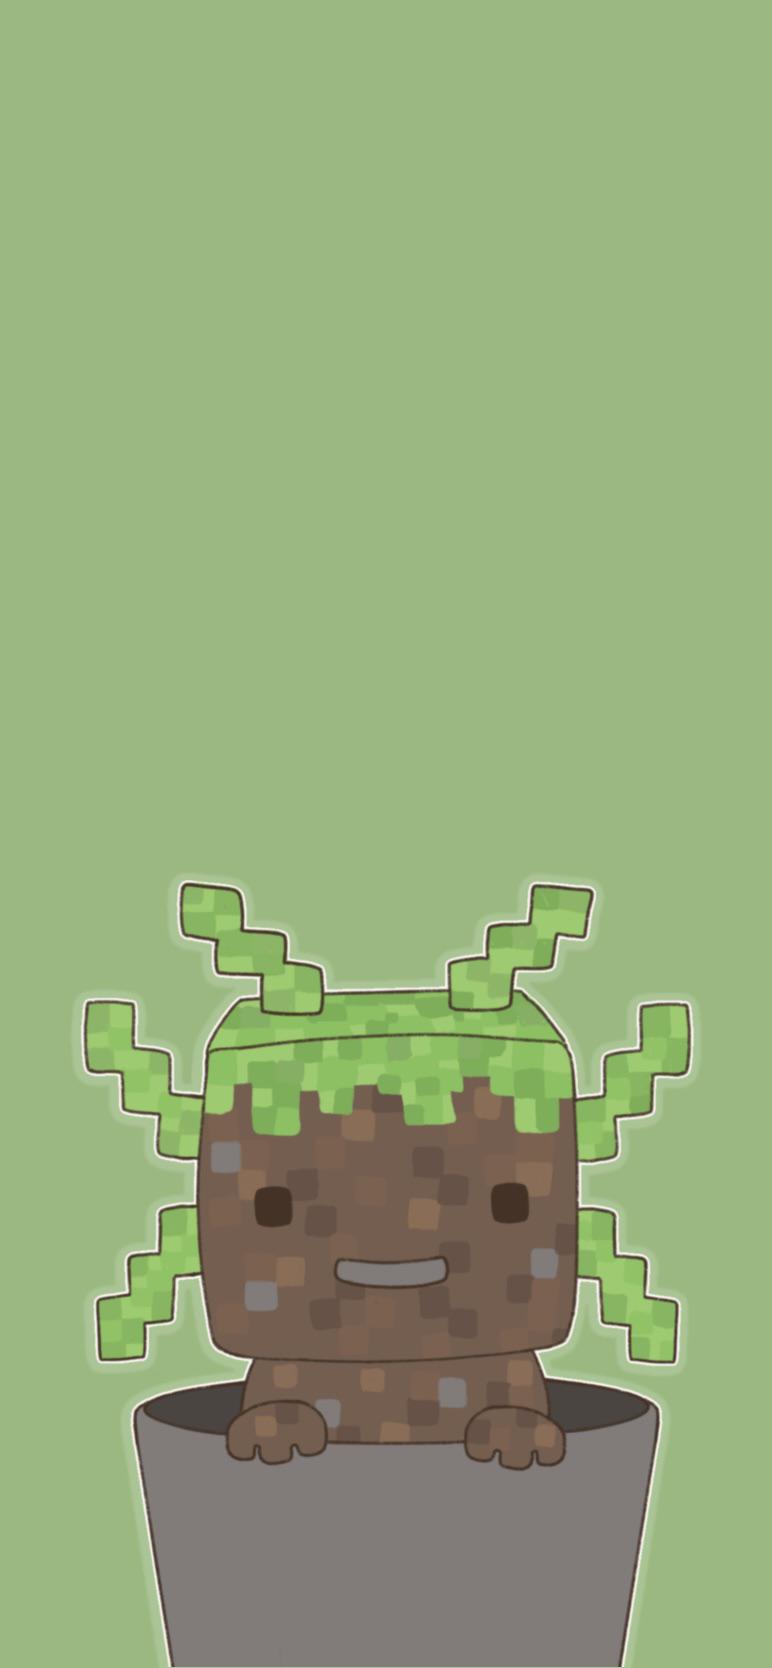 I made Minecraft Axolotl Wallpaper (PC and Mobile) and Profile Icon!